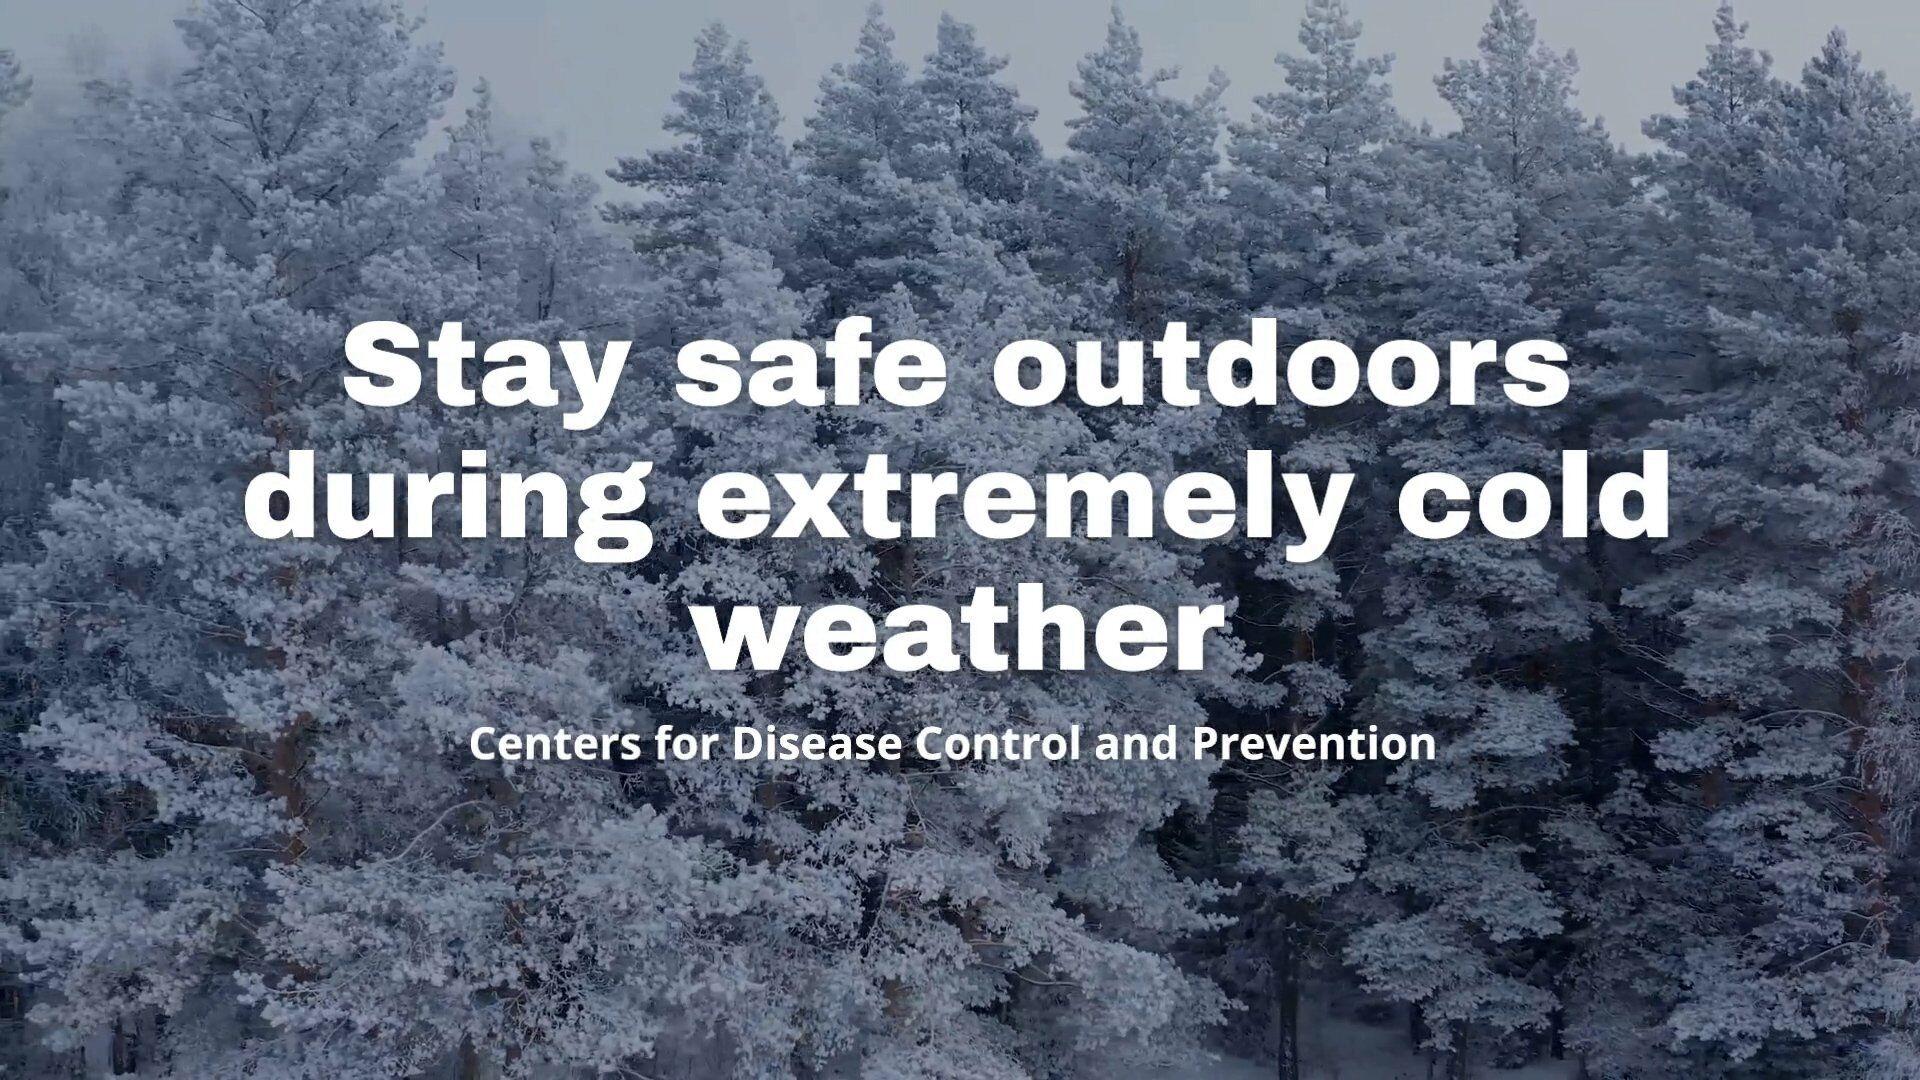 Staying safe in extreme cold weather